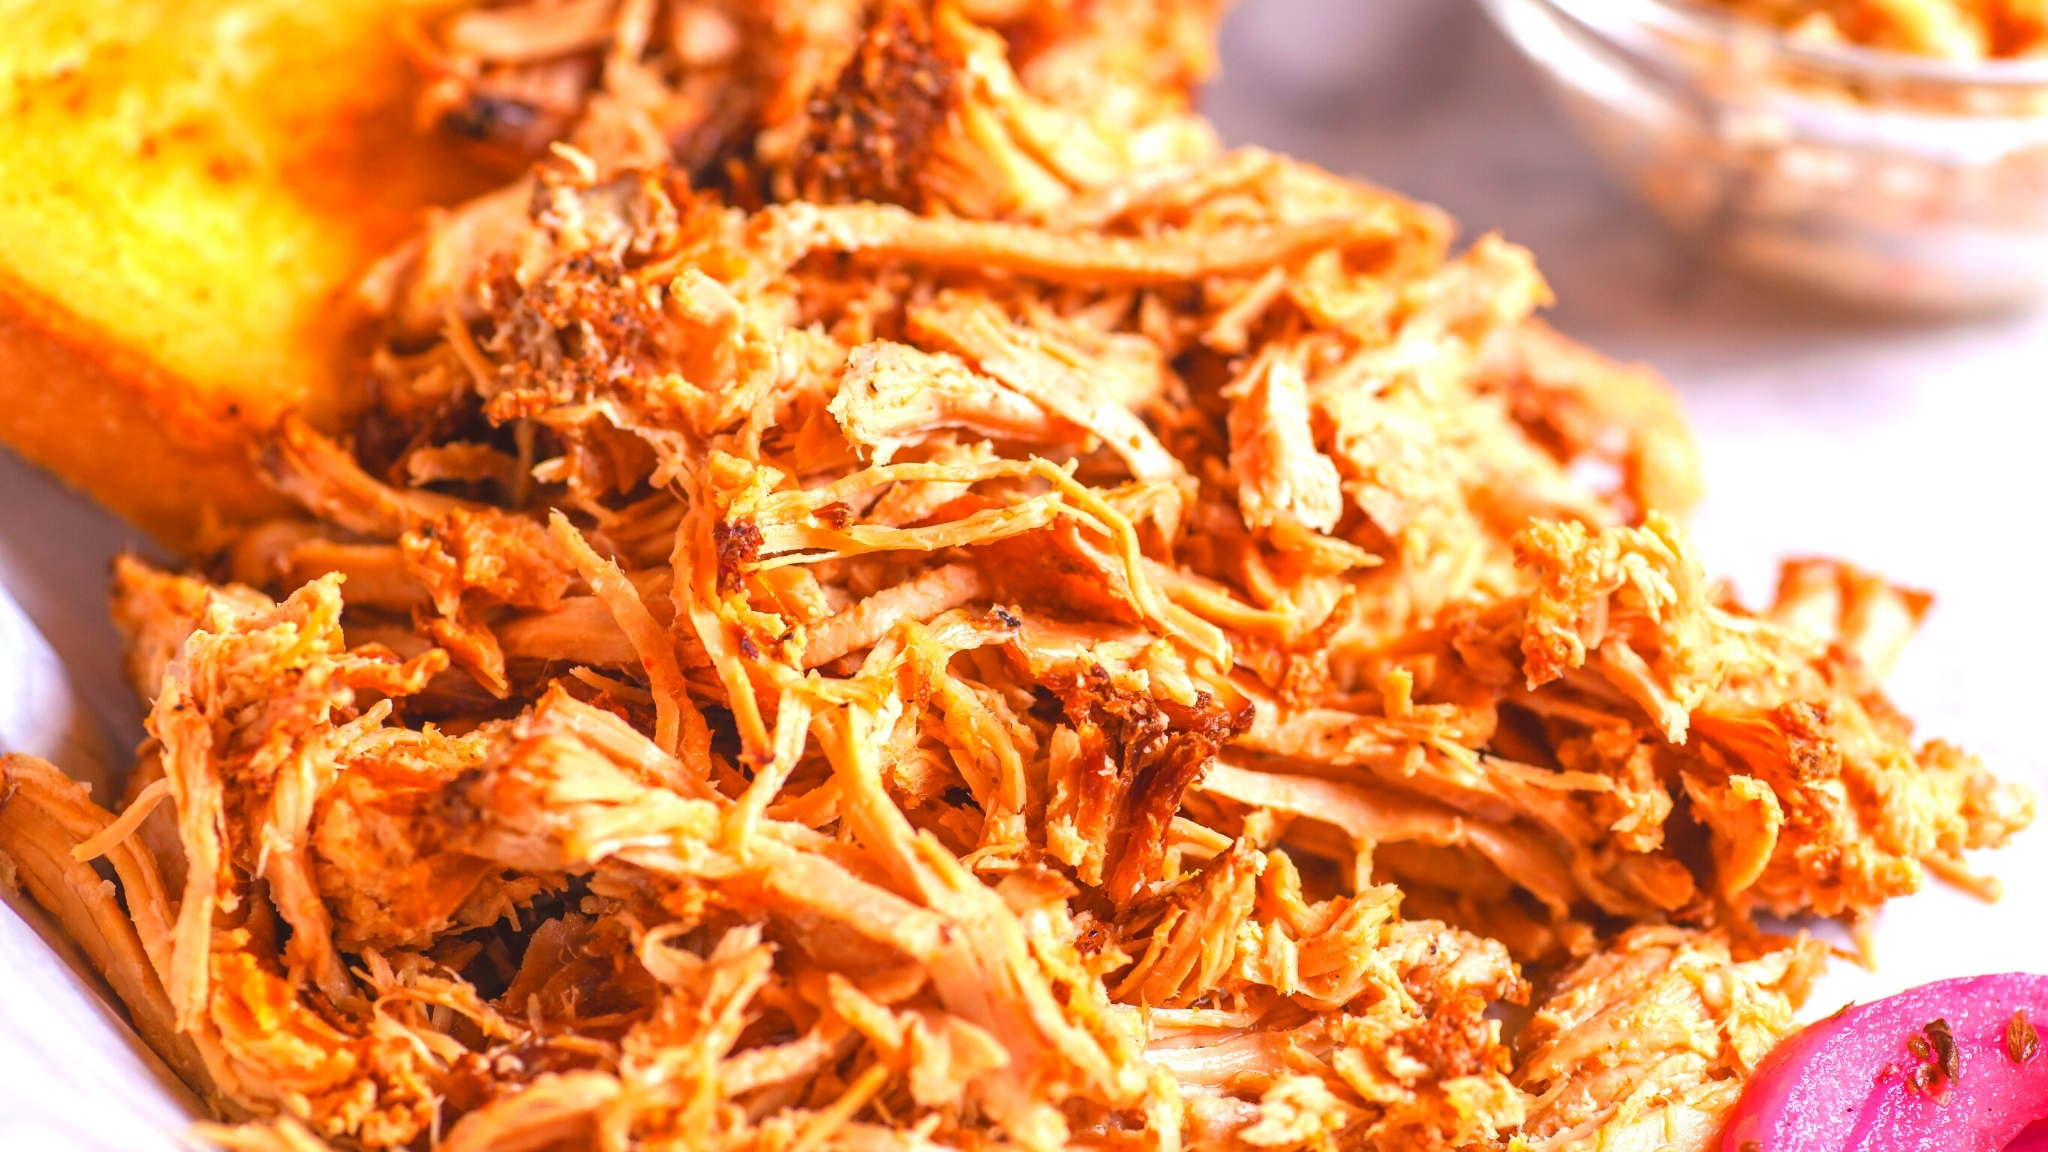 How to reheat pulled pork